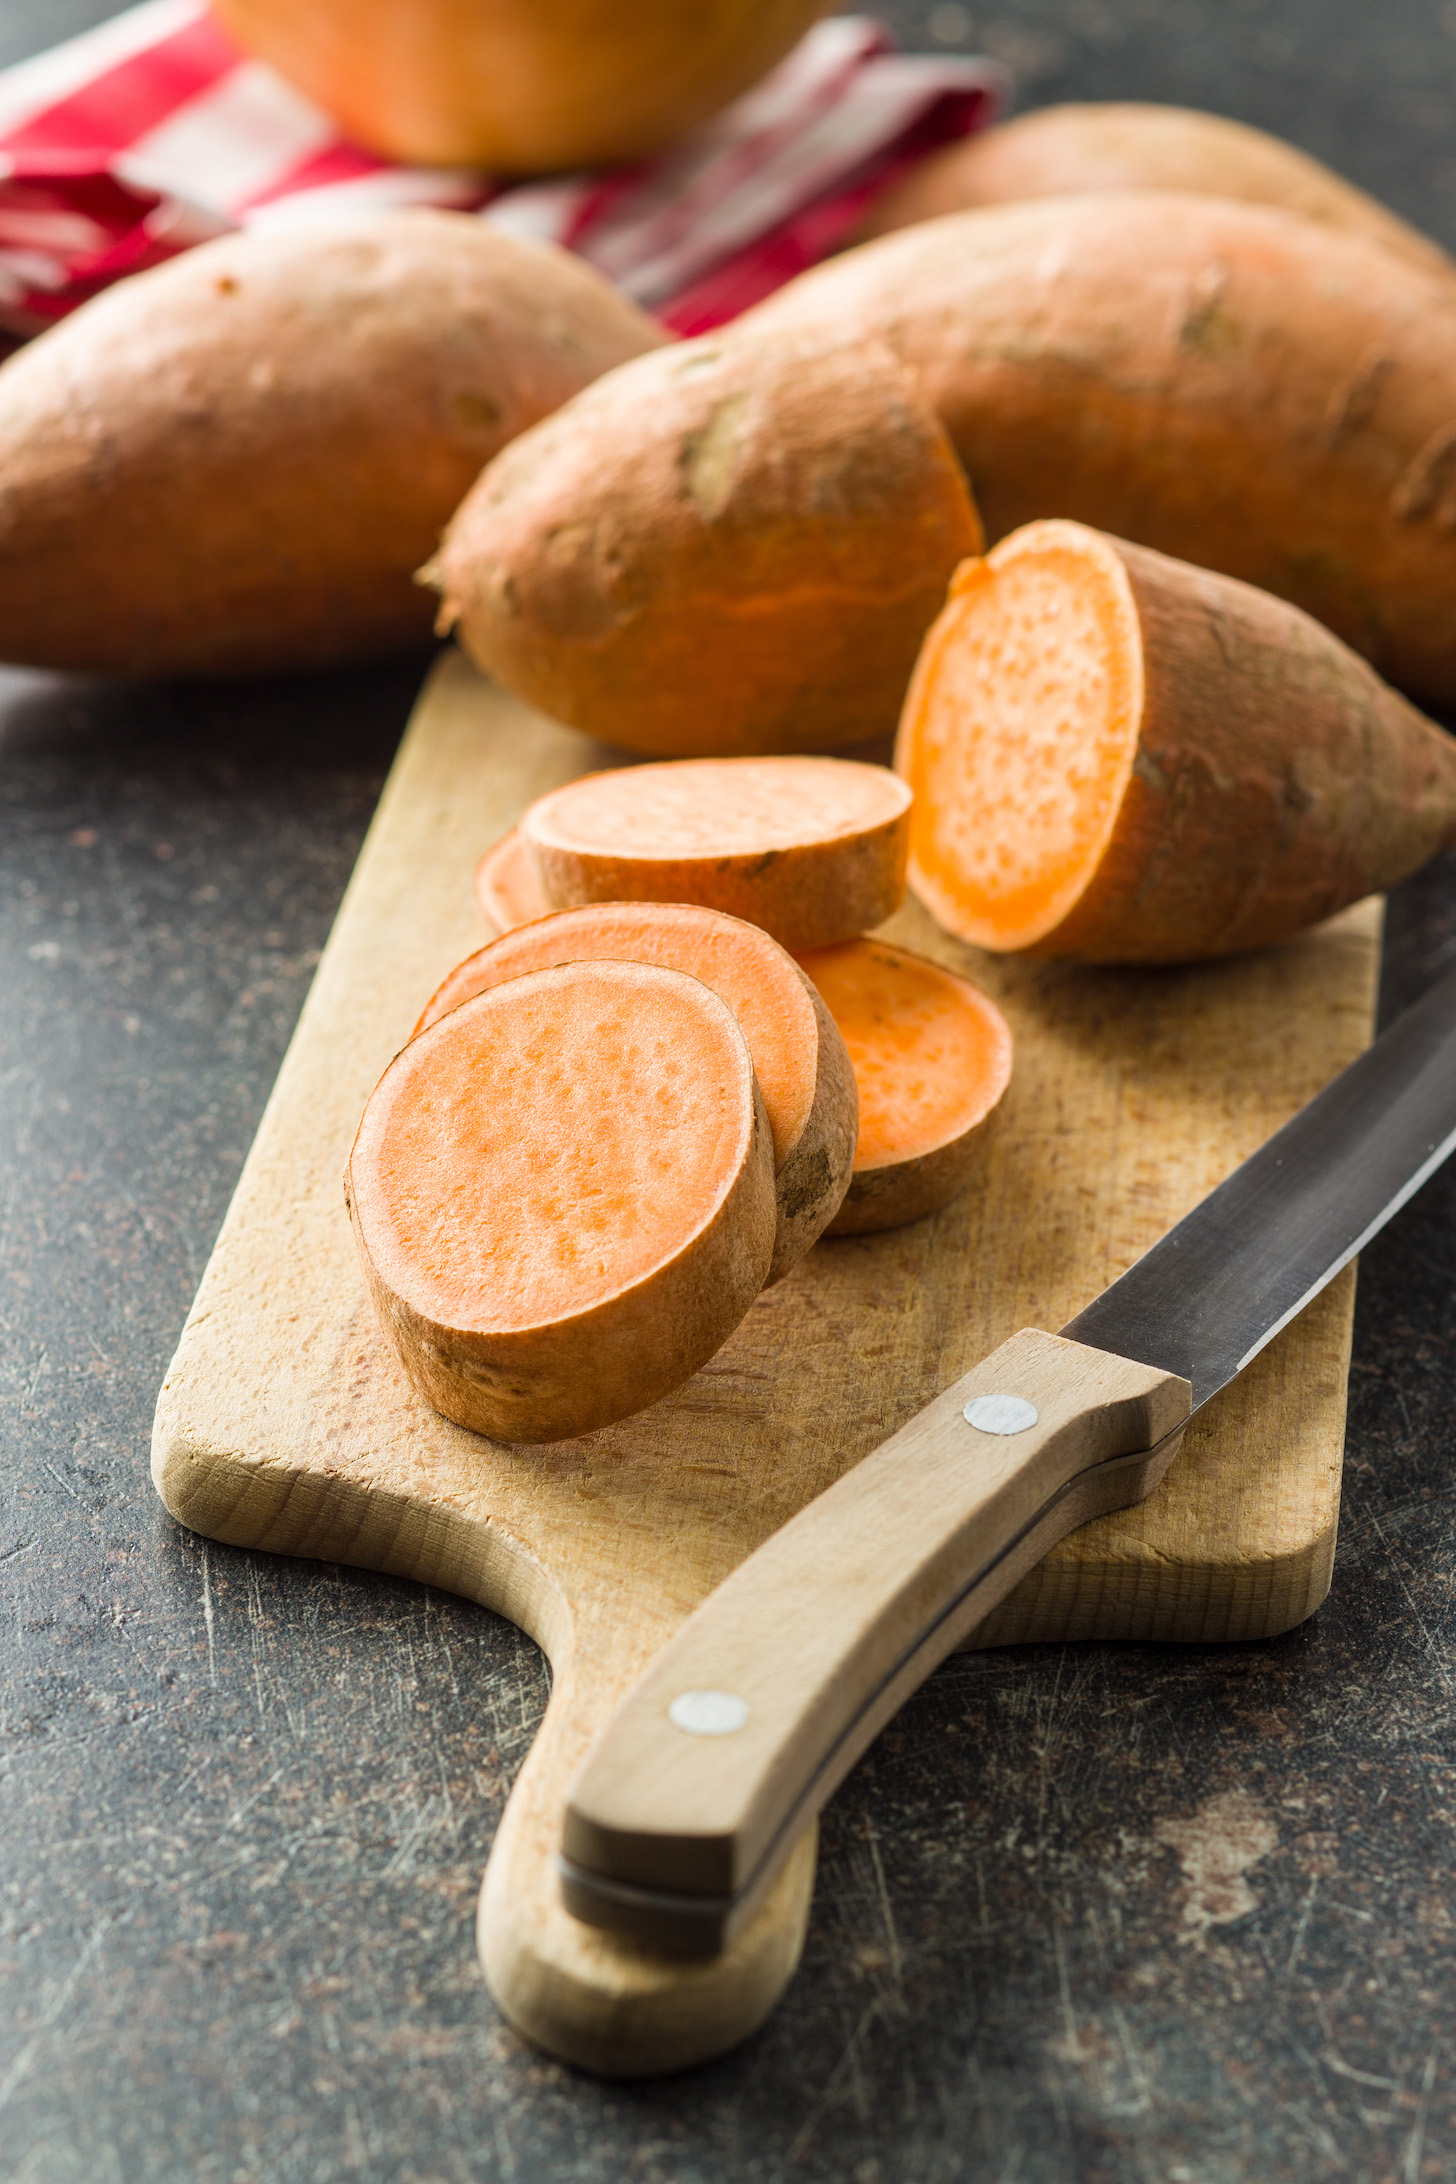 The sweet potatoes on cutting board on old kitchen table.